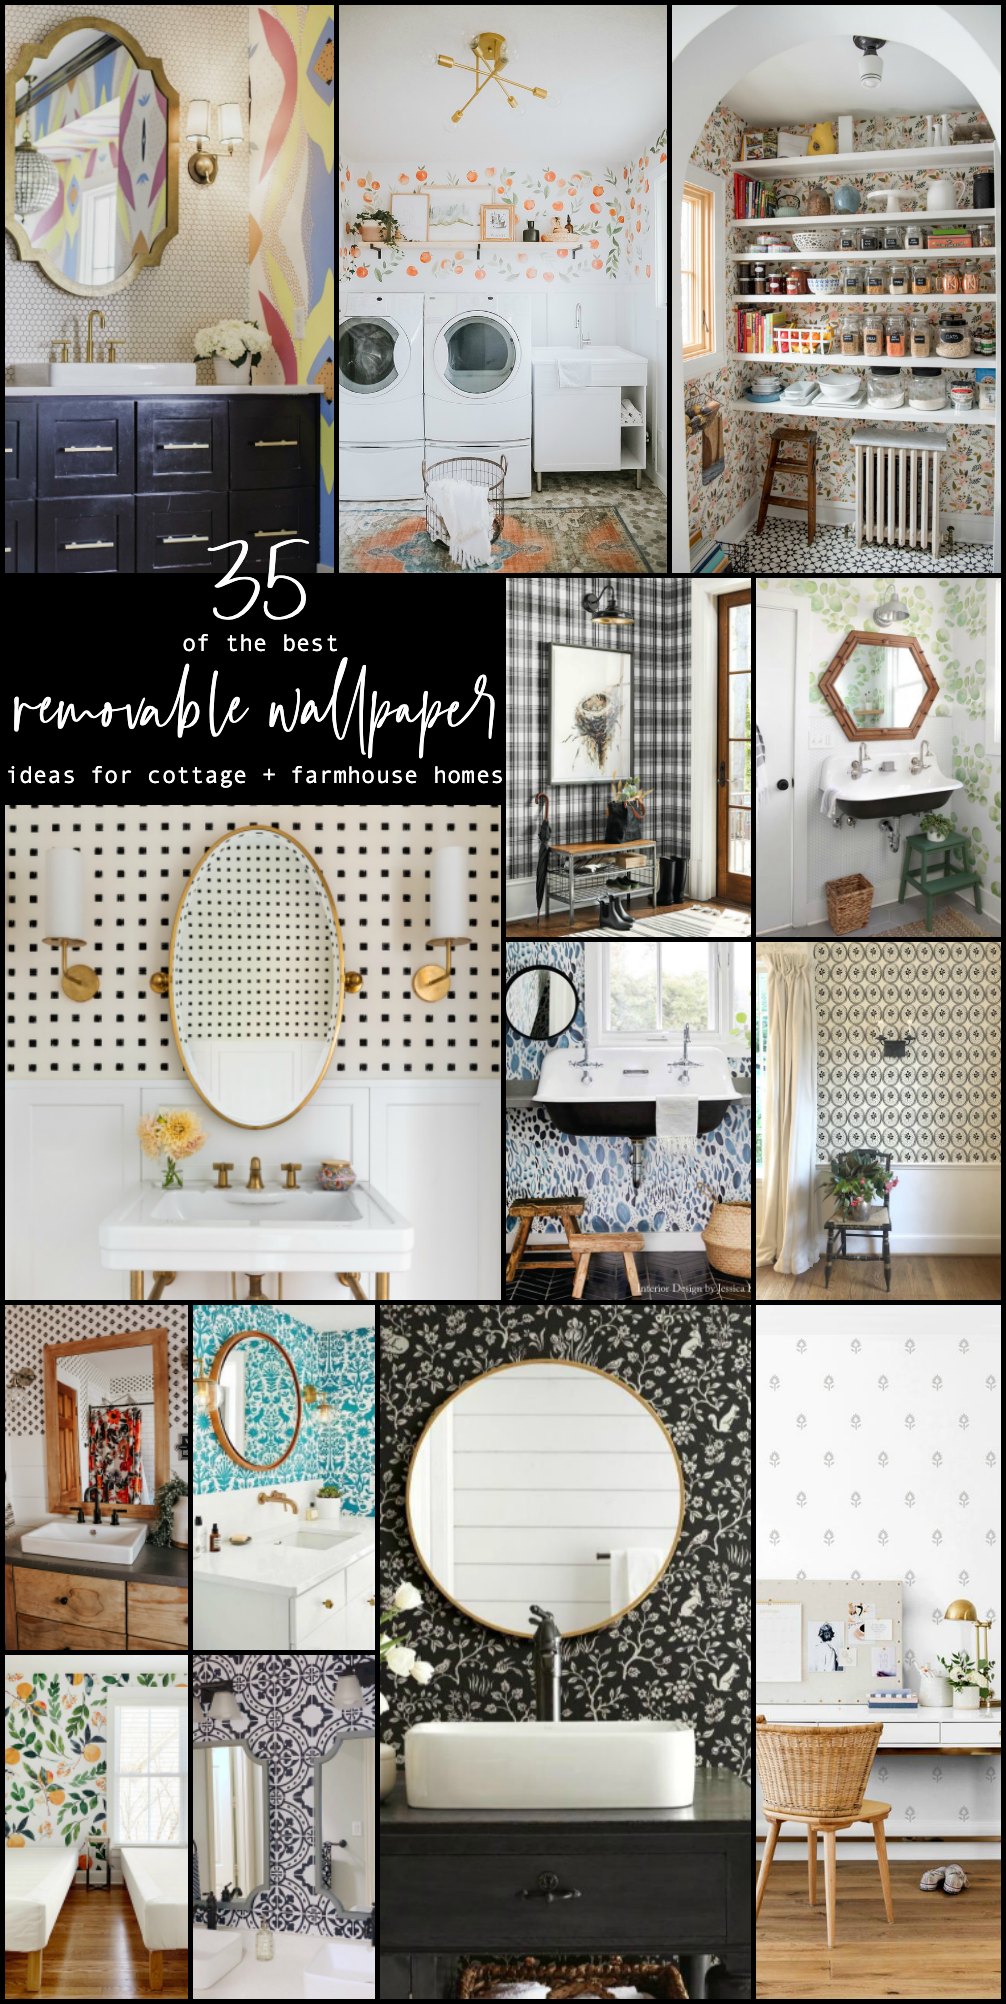 The BEST Cottage and Farmhouse Removable Wallpaper Ideas. Add COLOR and pattern to your cottage or farmhouse home with these easy to install and removable wallpaper ideas! 